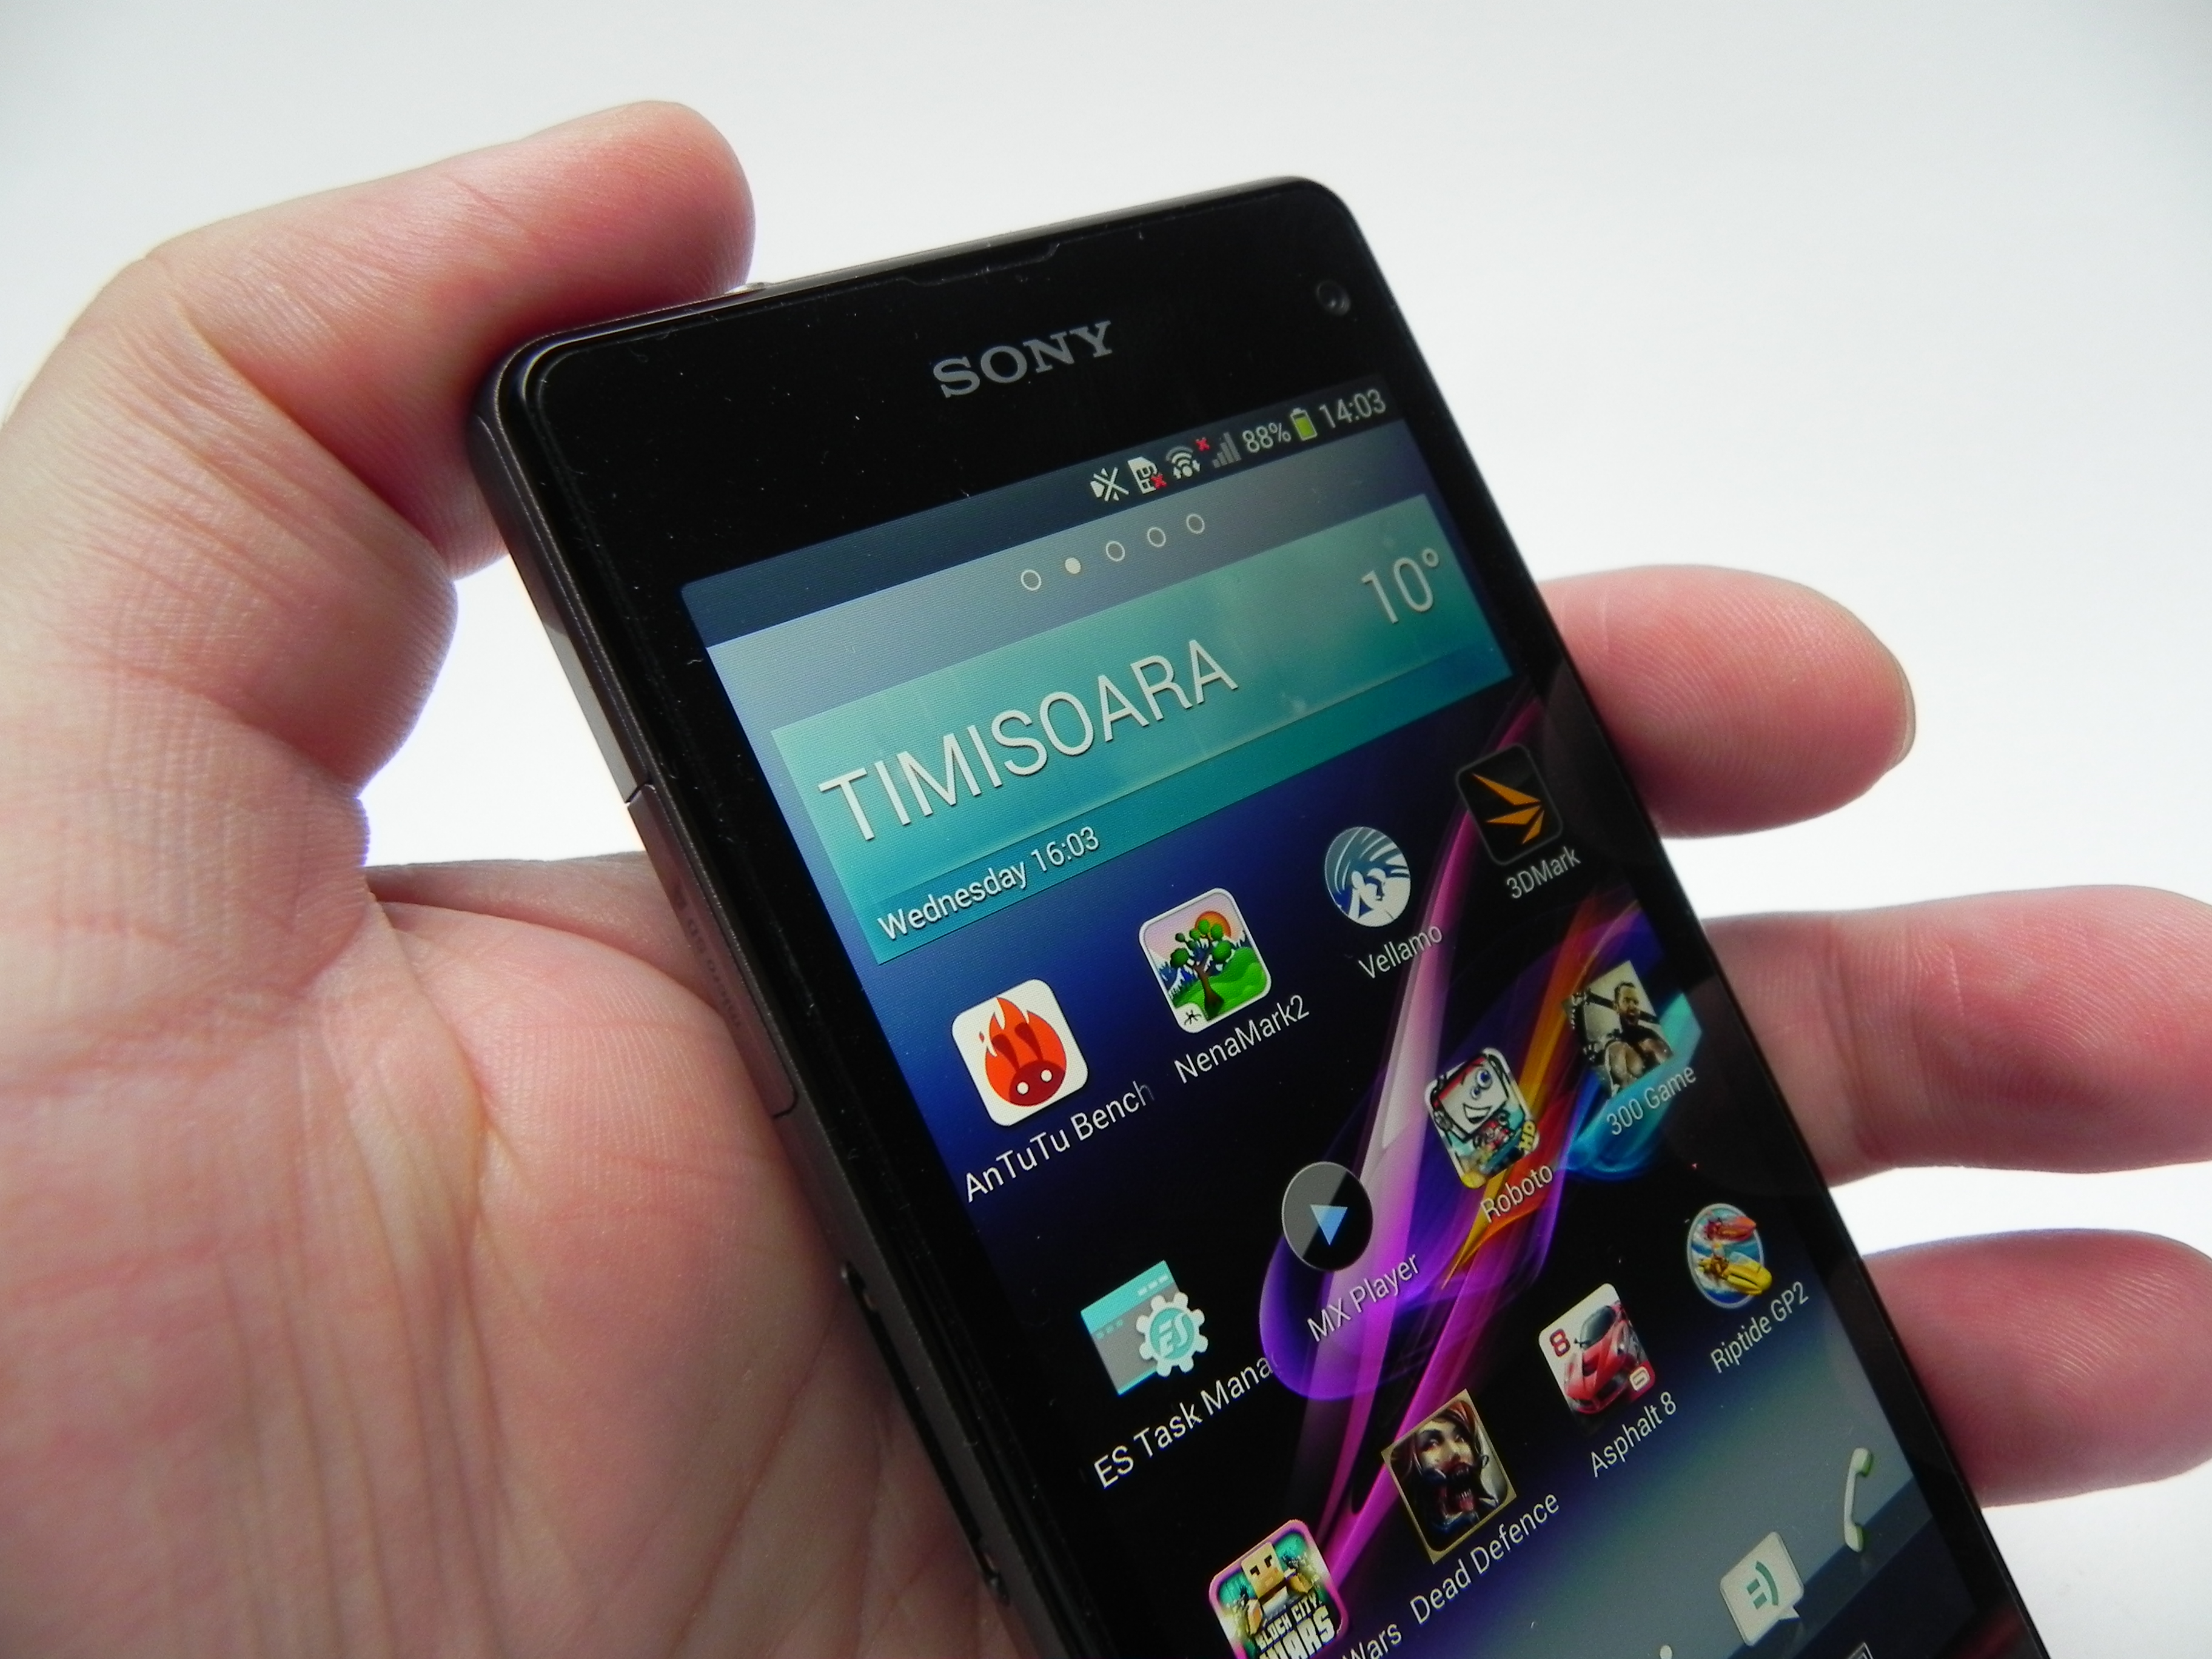 Xperia Z1 Compact Review: Smaller Xperia is Better Than the Big Brother in a Regards (Video) | GSMDome.com